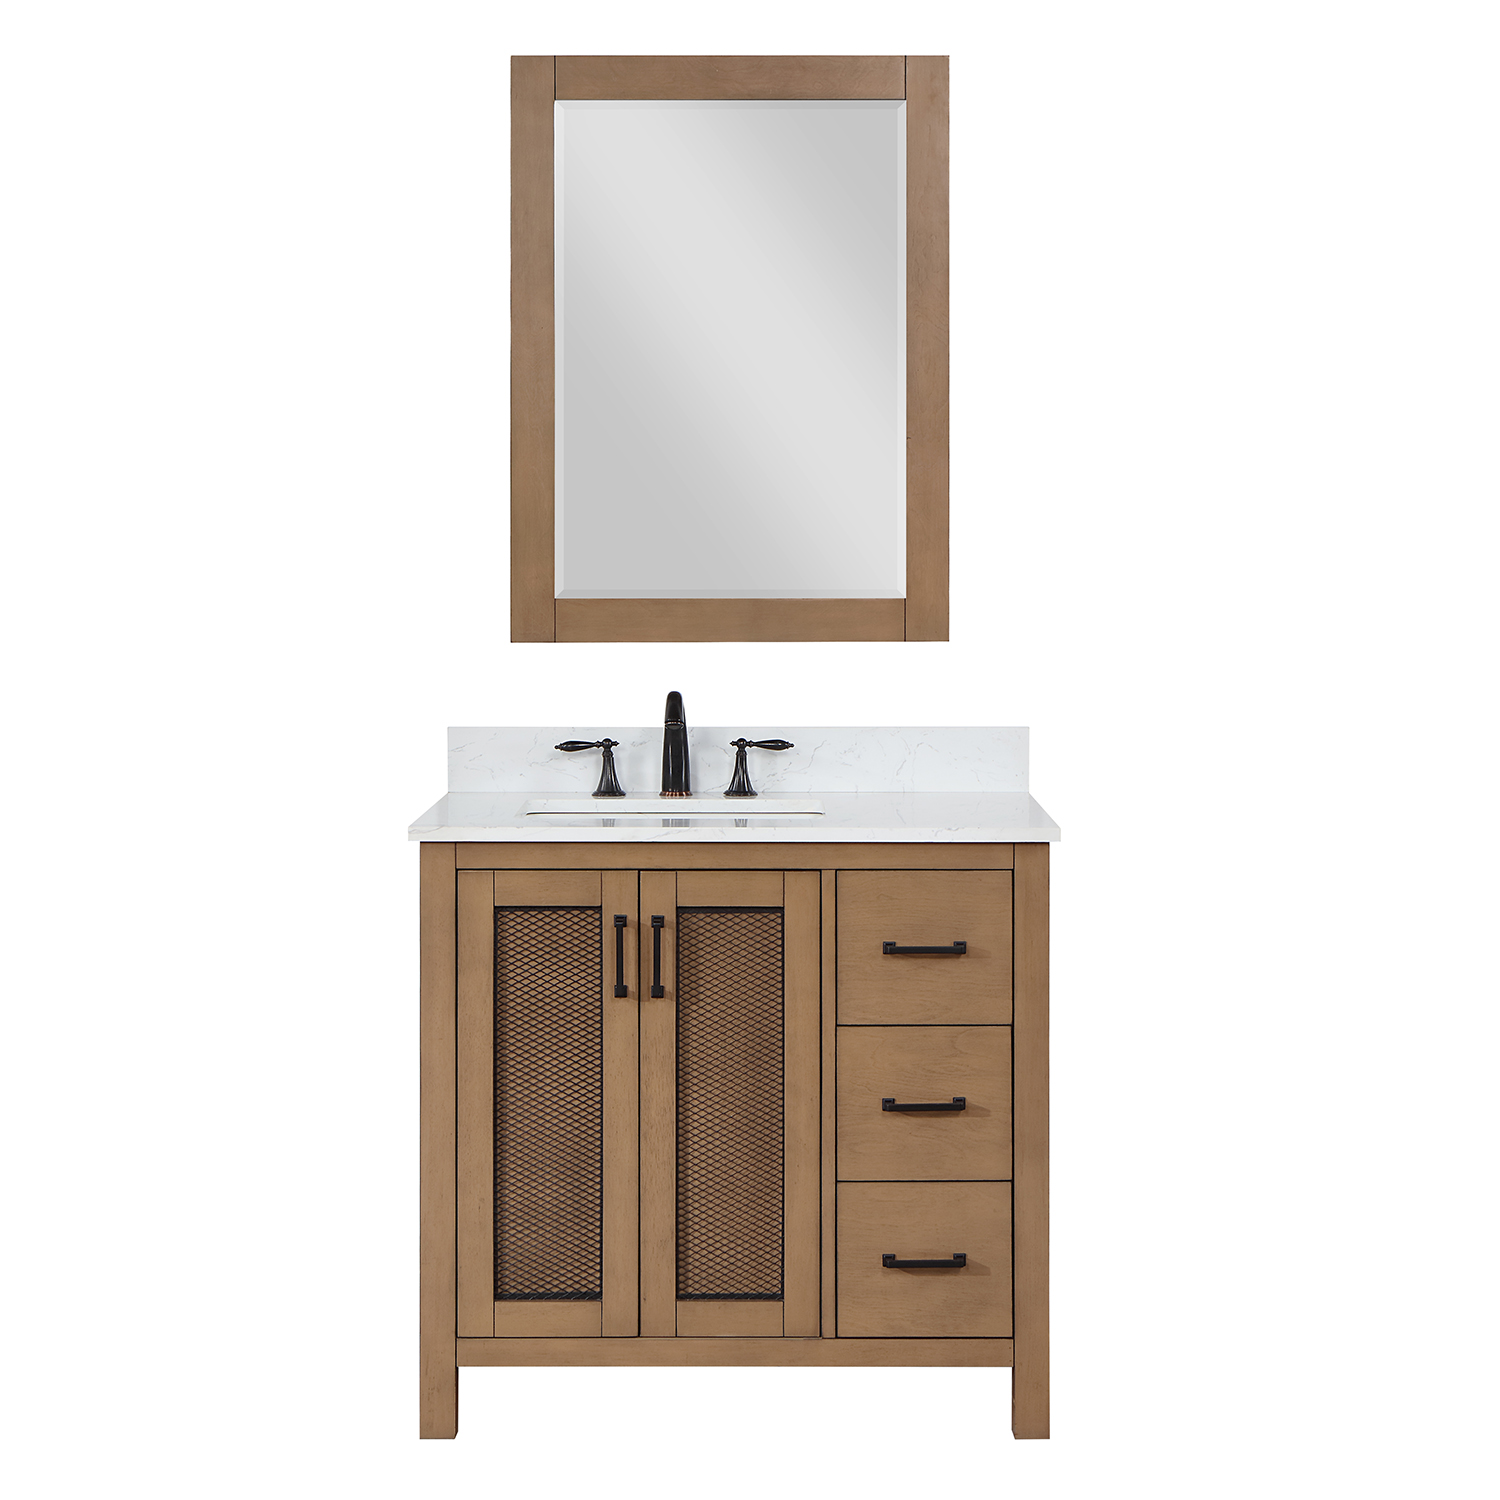 Issac Edwards Collection 36" Single Bathroom Vanity Set in Brown Pine with Carrara White Composite Stone Countertop without Mirror 